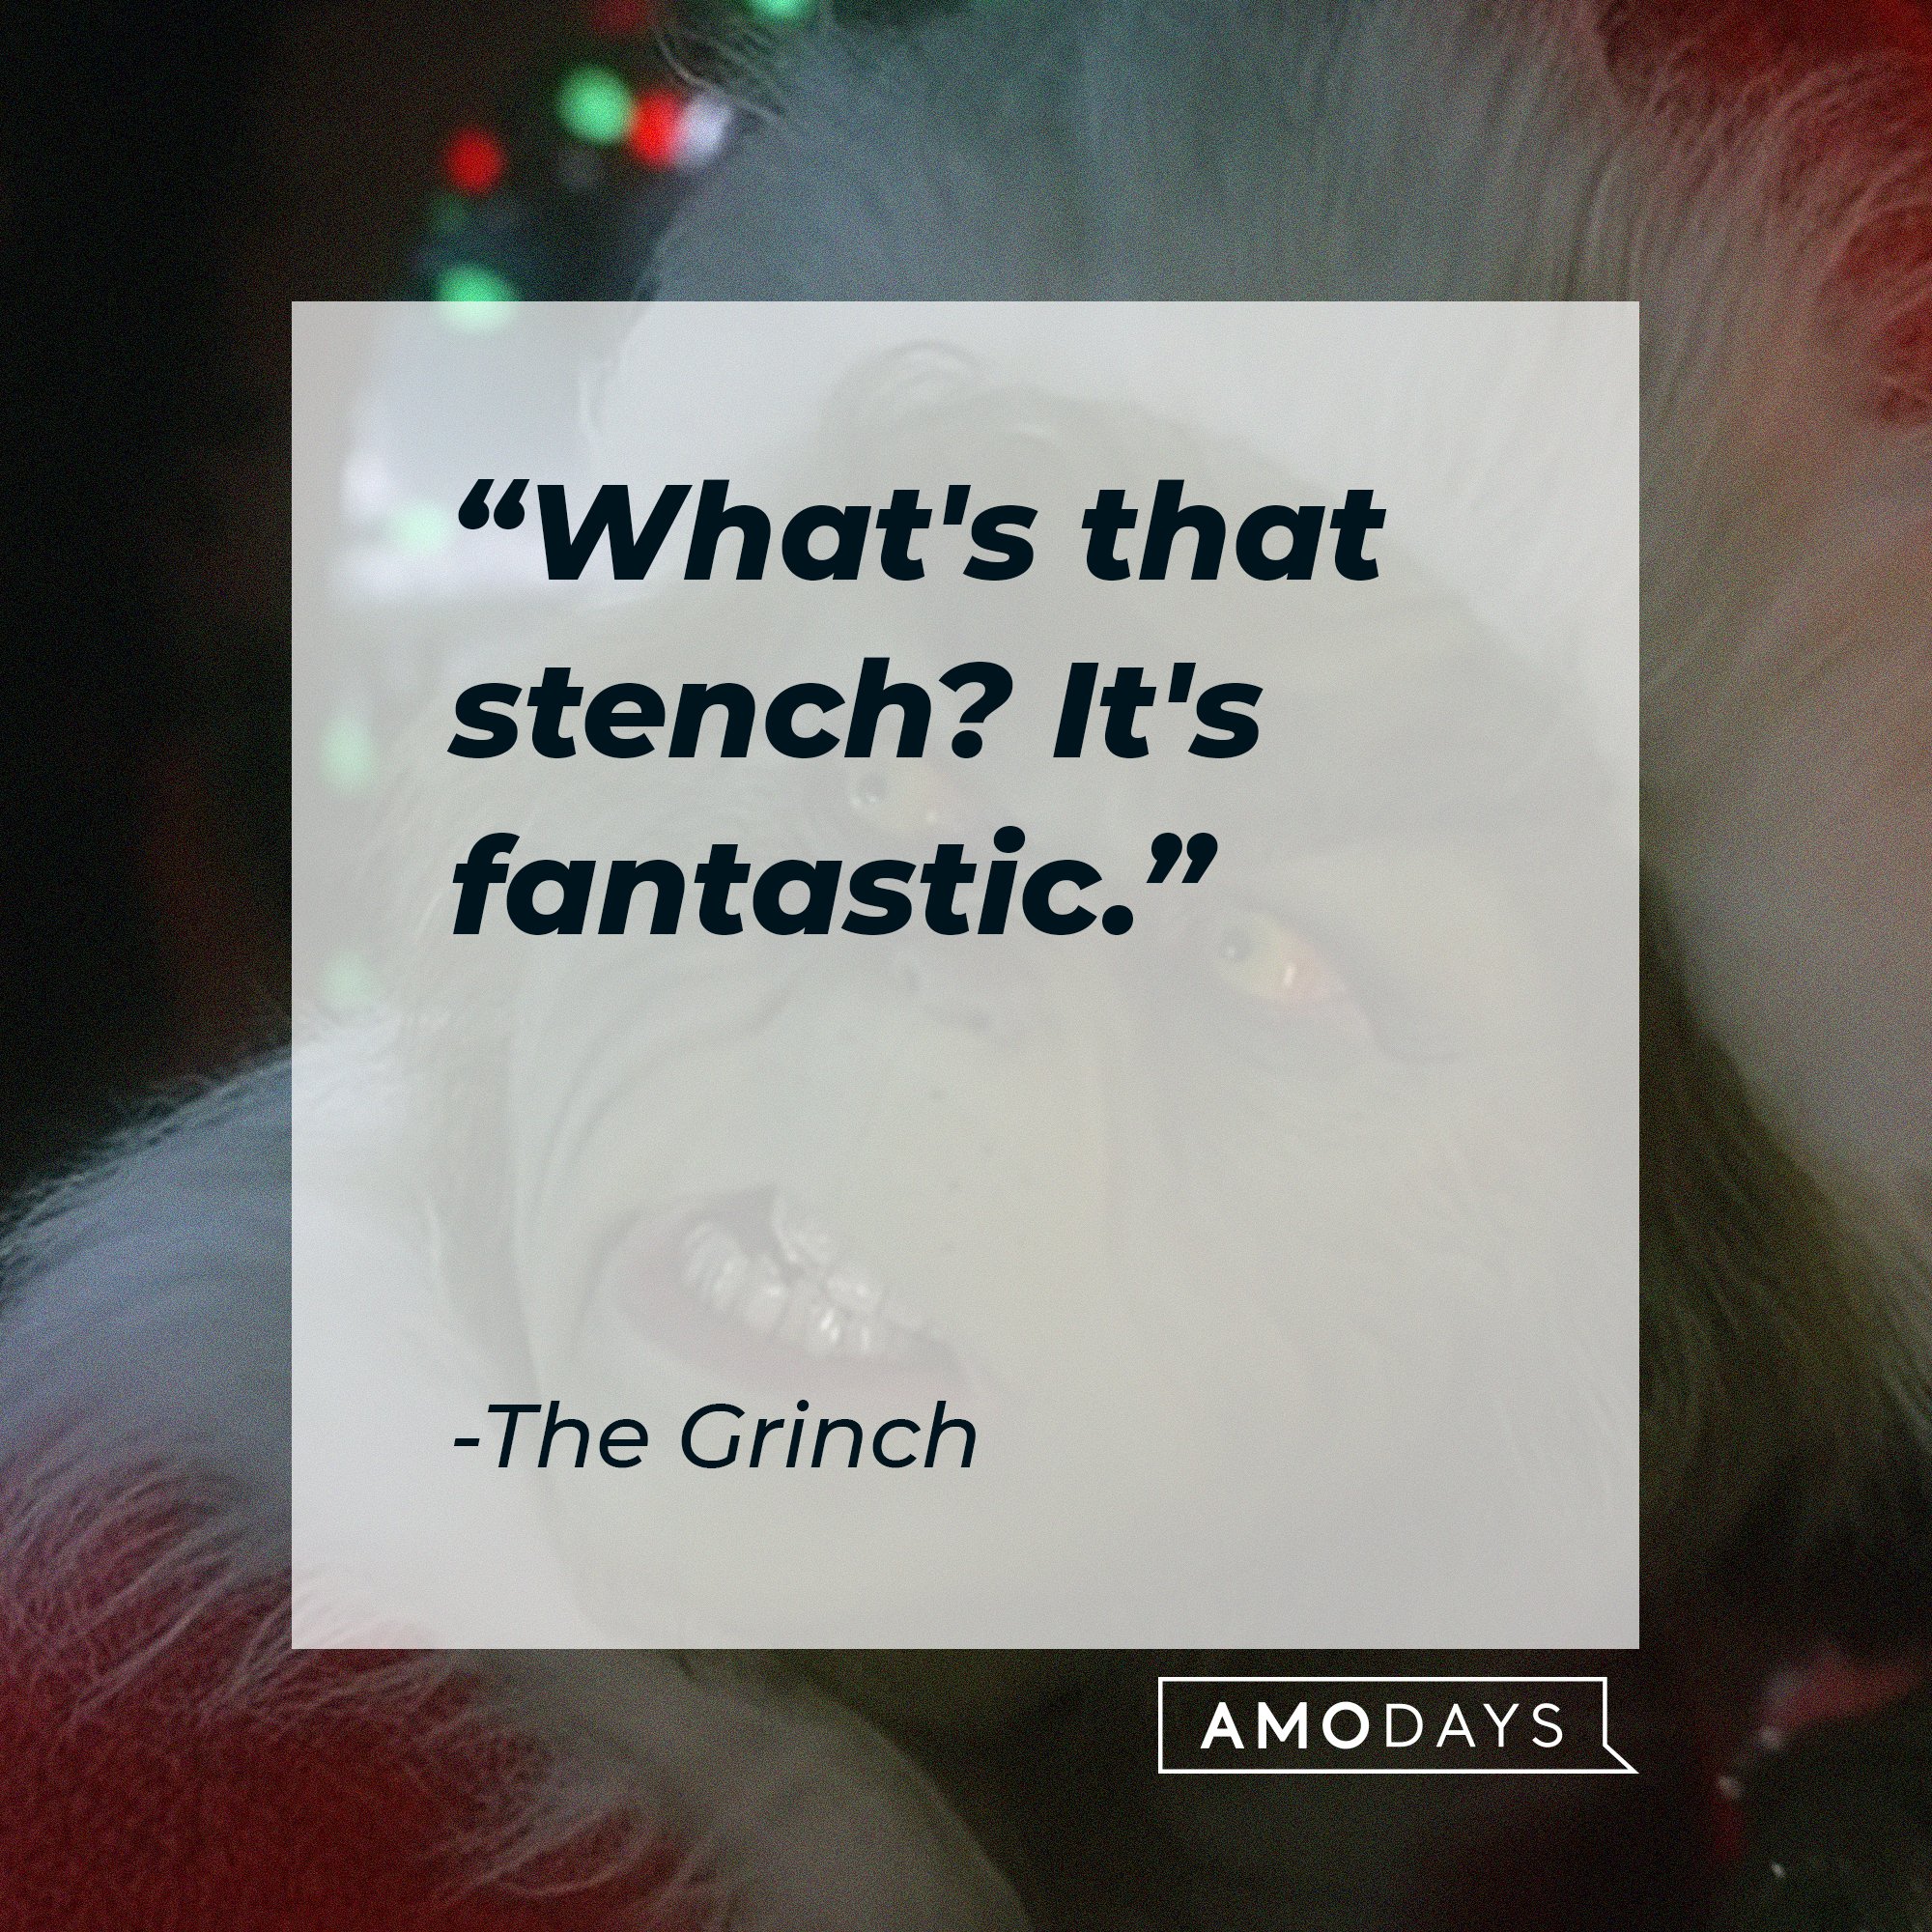 The Grinch's quote:"What's that stench? It's fantastic." | Image: AmoDays